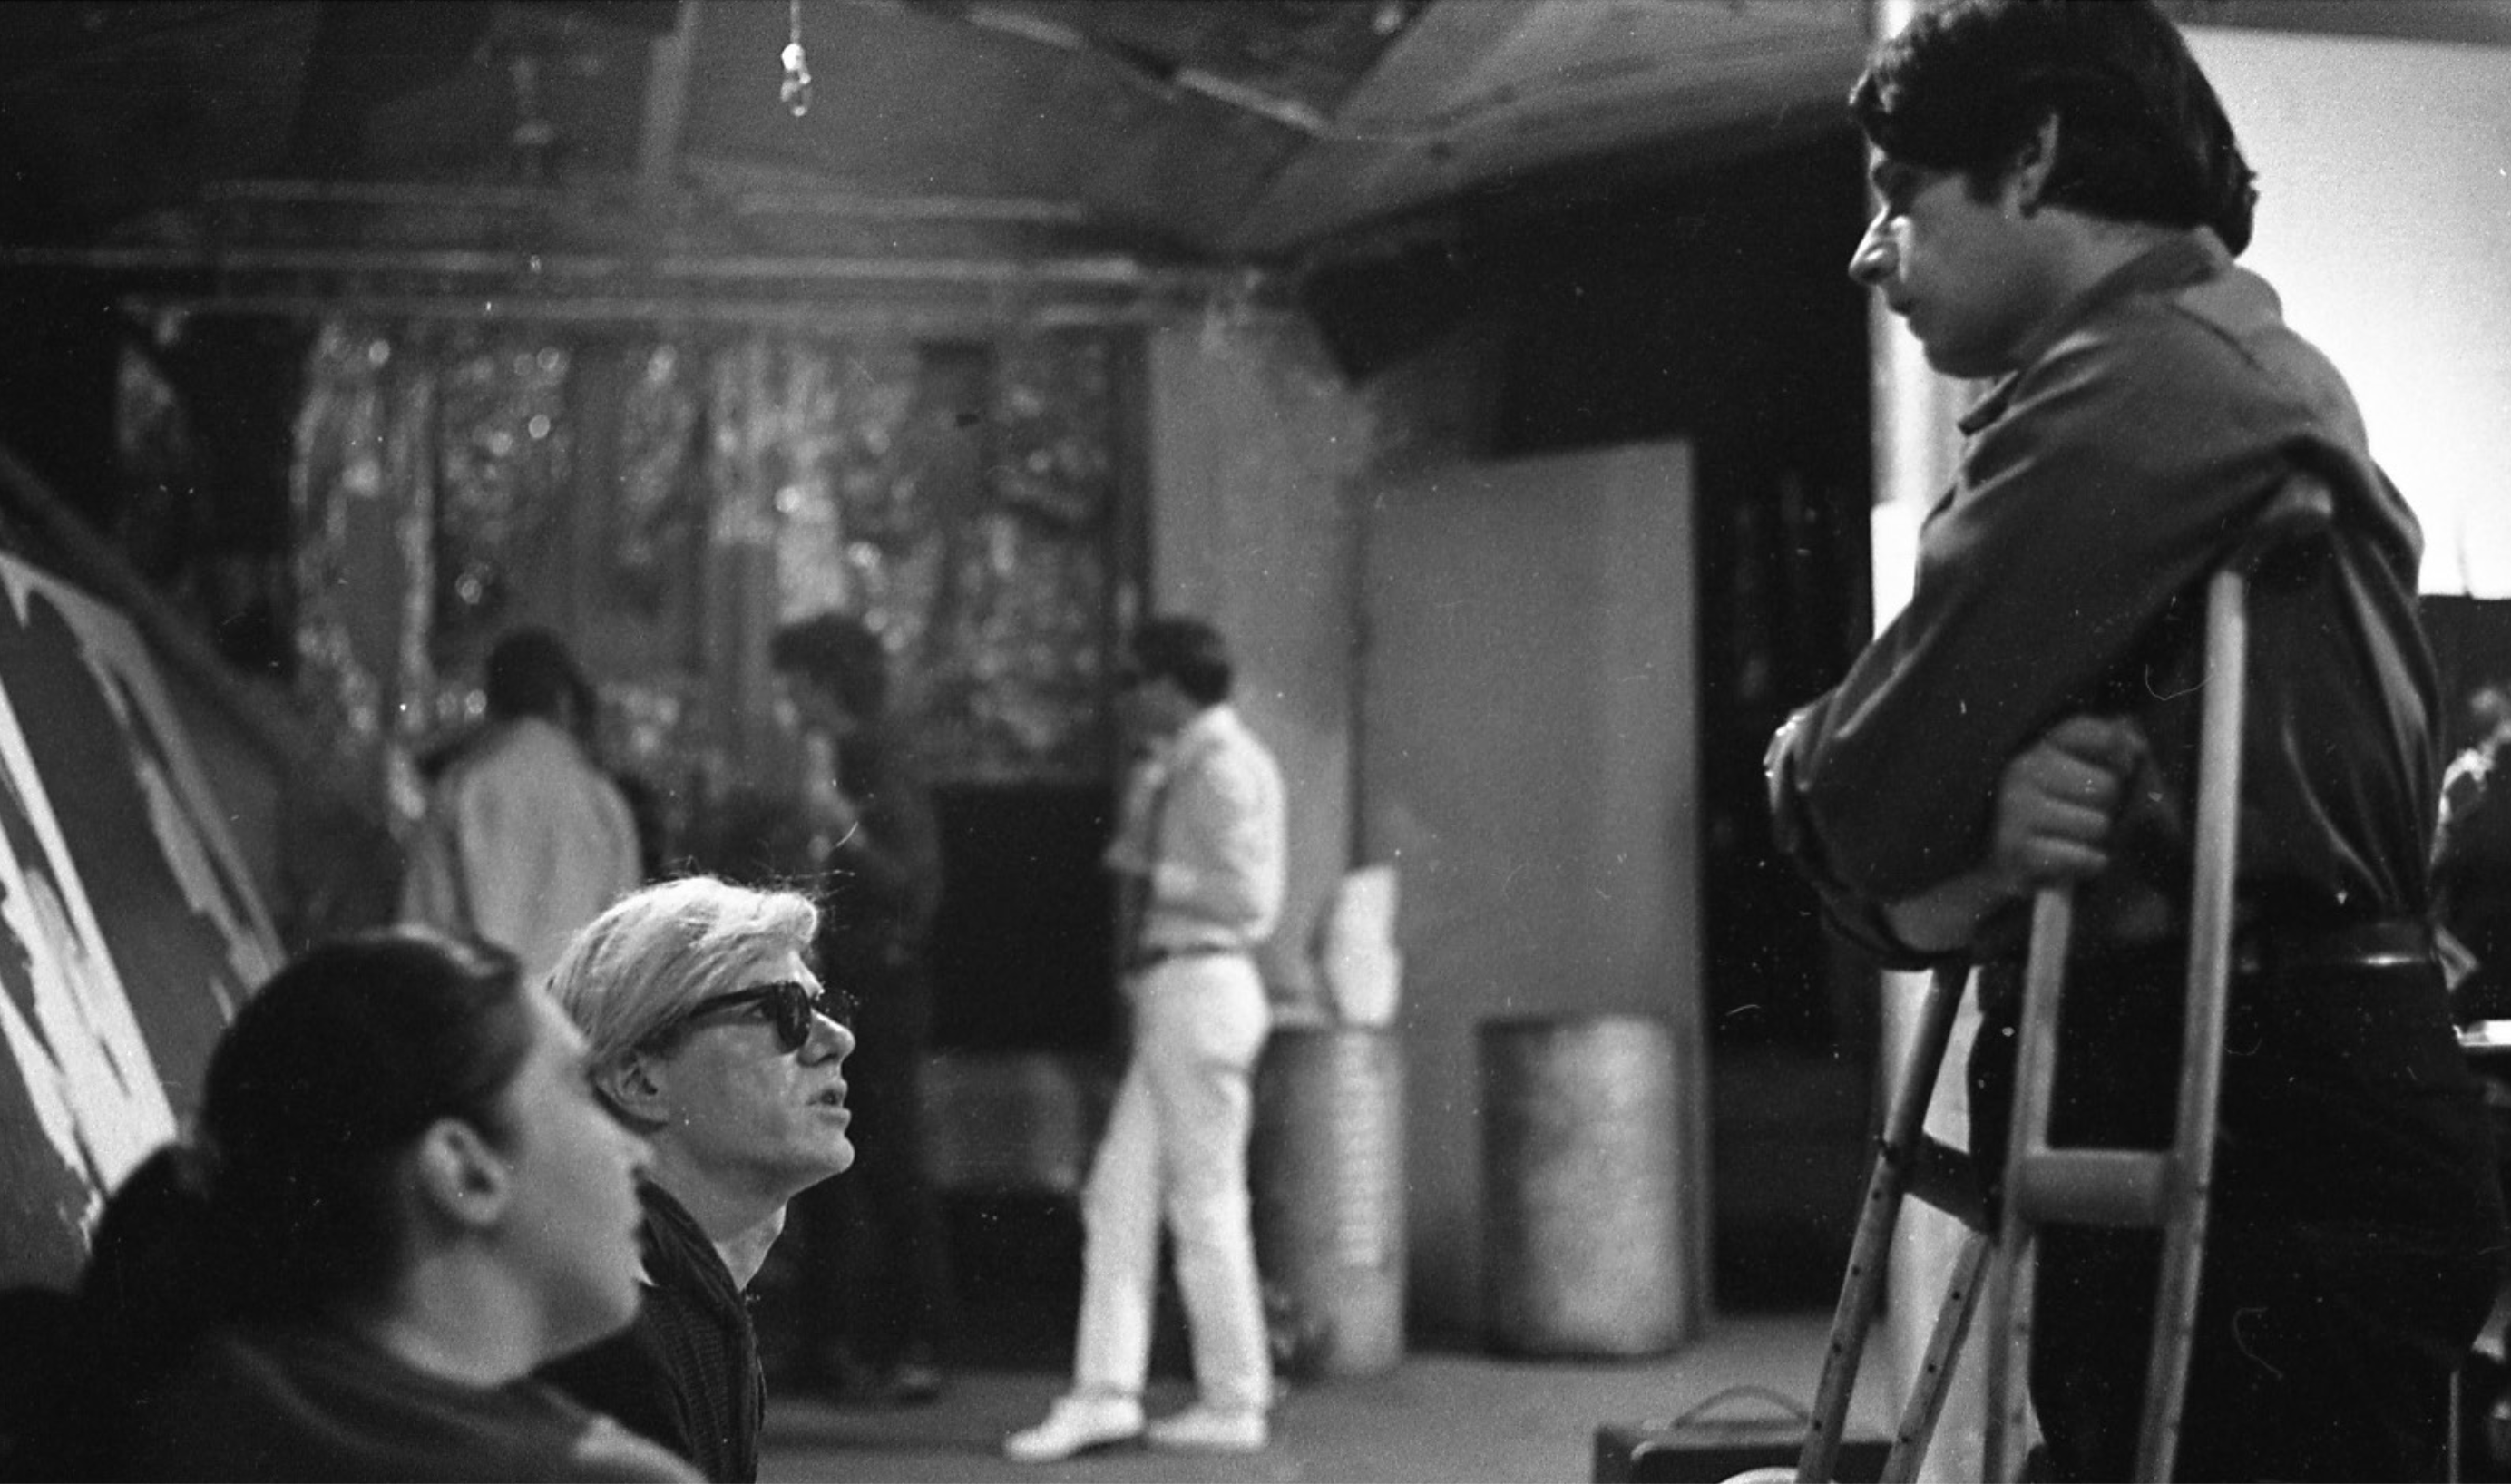 a black and white image, on the left hand side Andy Warhol with white hair and dark glasses looks up at Stephen Dwoskin who stands resting on a pair of crutches looking down at him